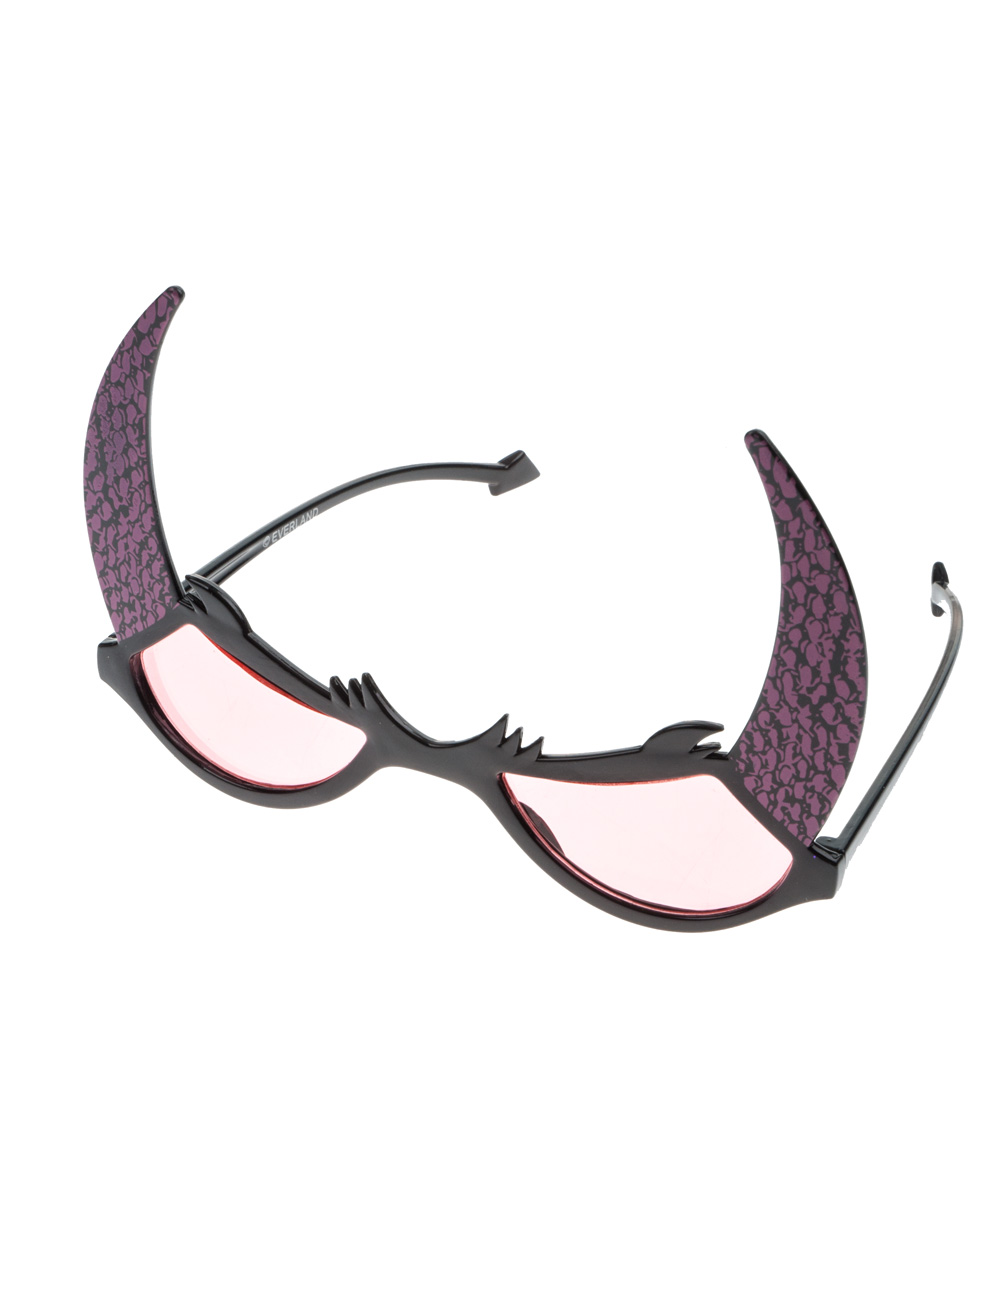 Brille Teufel rot